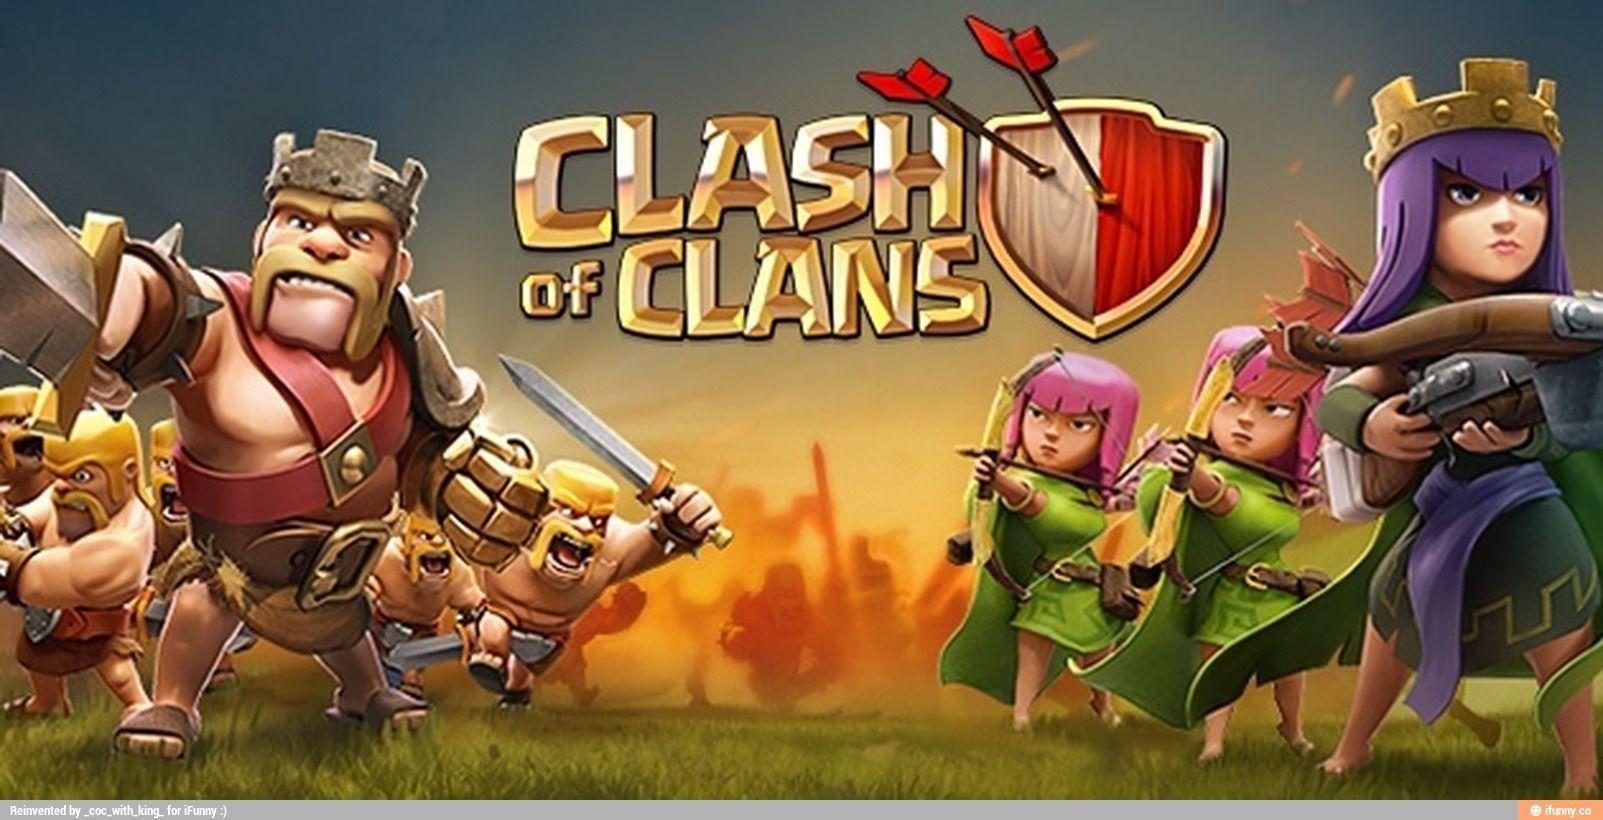 Clash Of Clans Free 4K Wallpapers, Clash Of Clans, Game